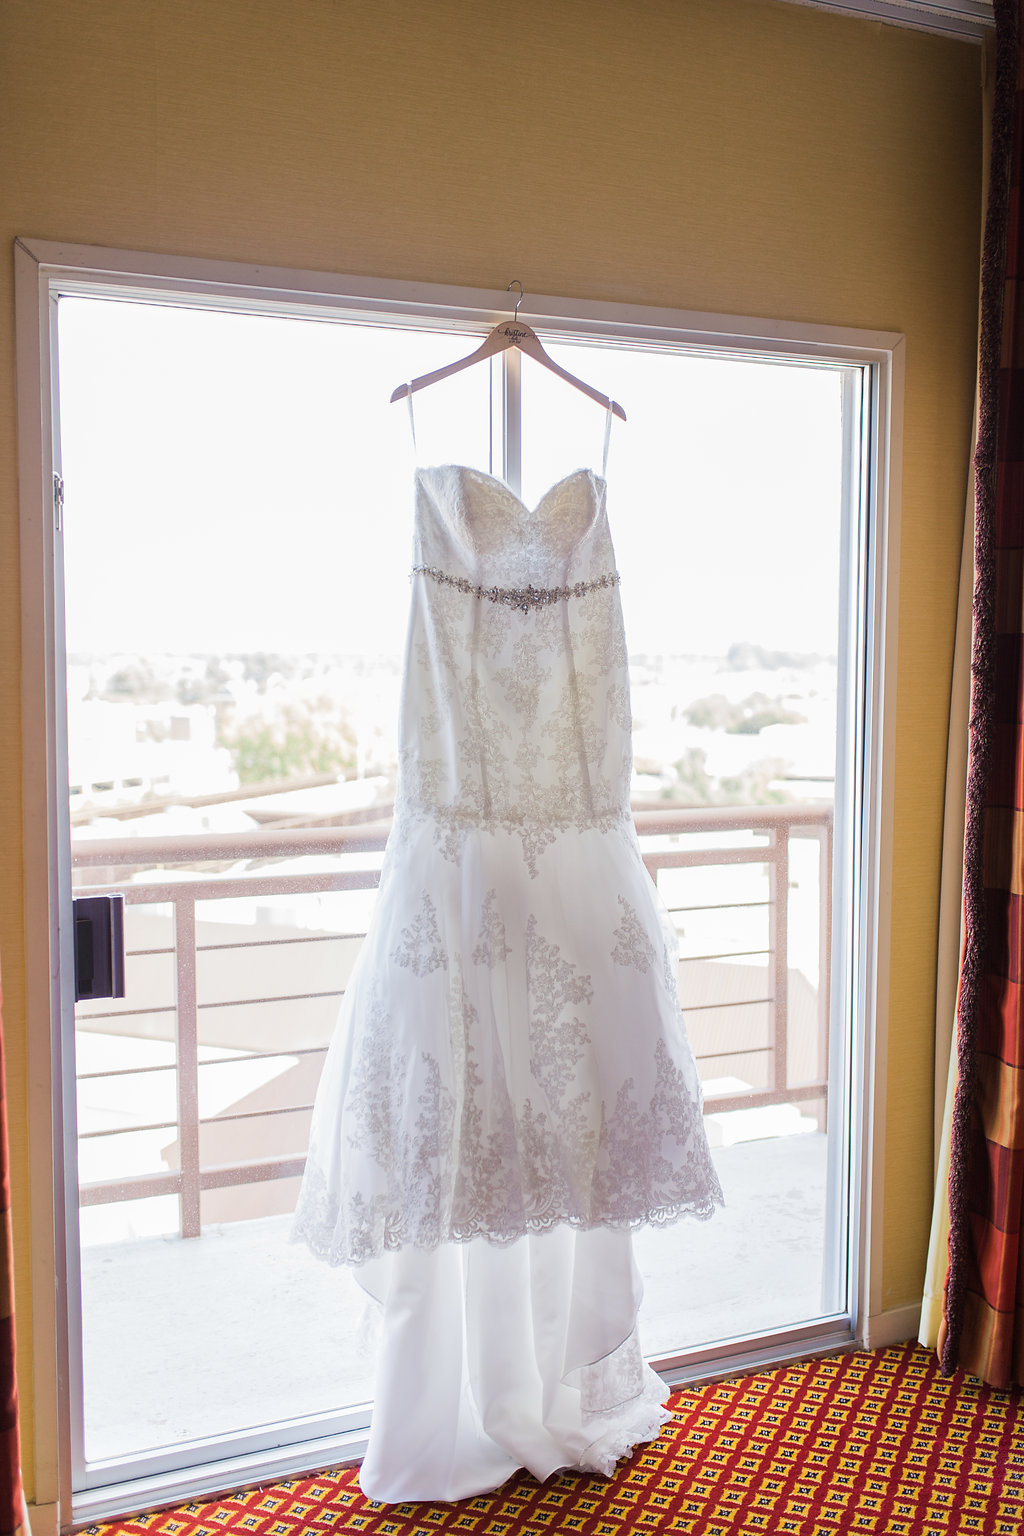 Jacques Ranch Fall Wedding — The overwhelmed Bride Wedding Blog